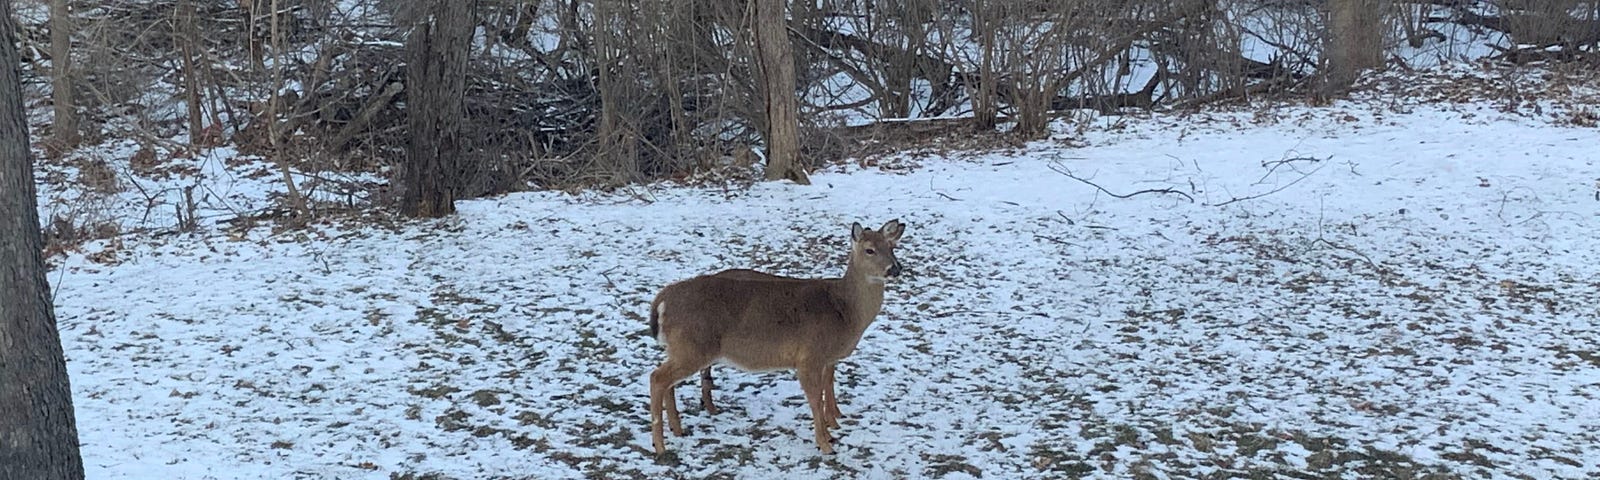 A deer located in my snow covered backyard.